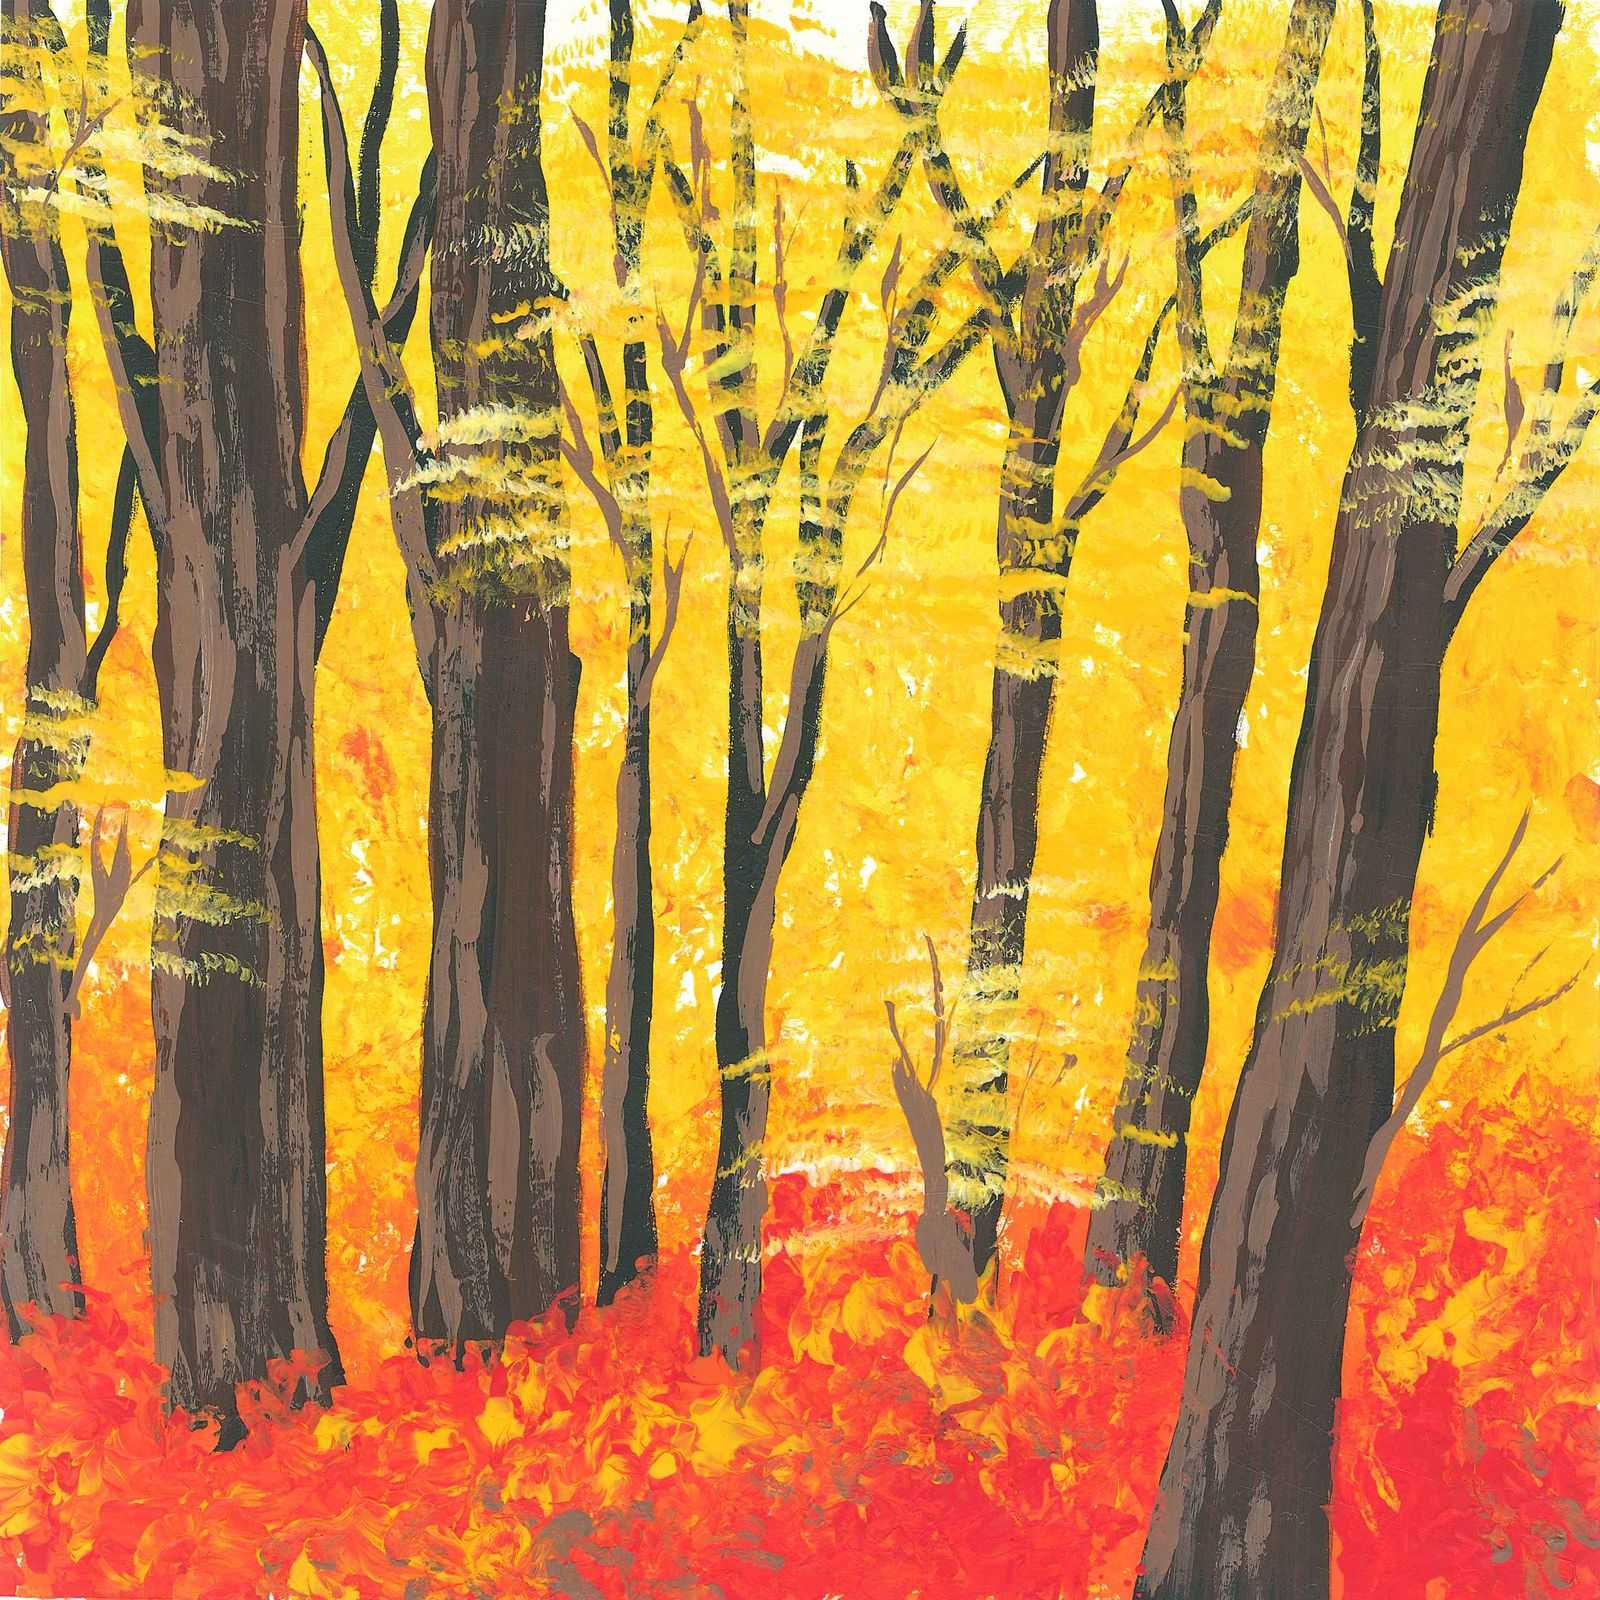 Autumn, Leaf Falling, Branch Braking, Windy Forest - nature landscape painting - earth.fm